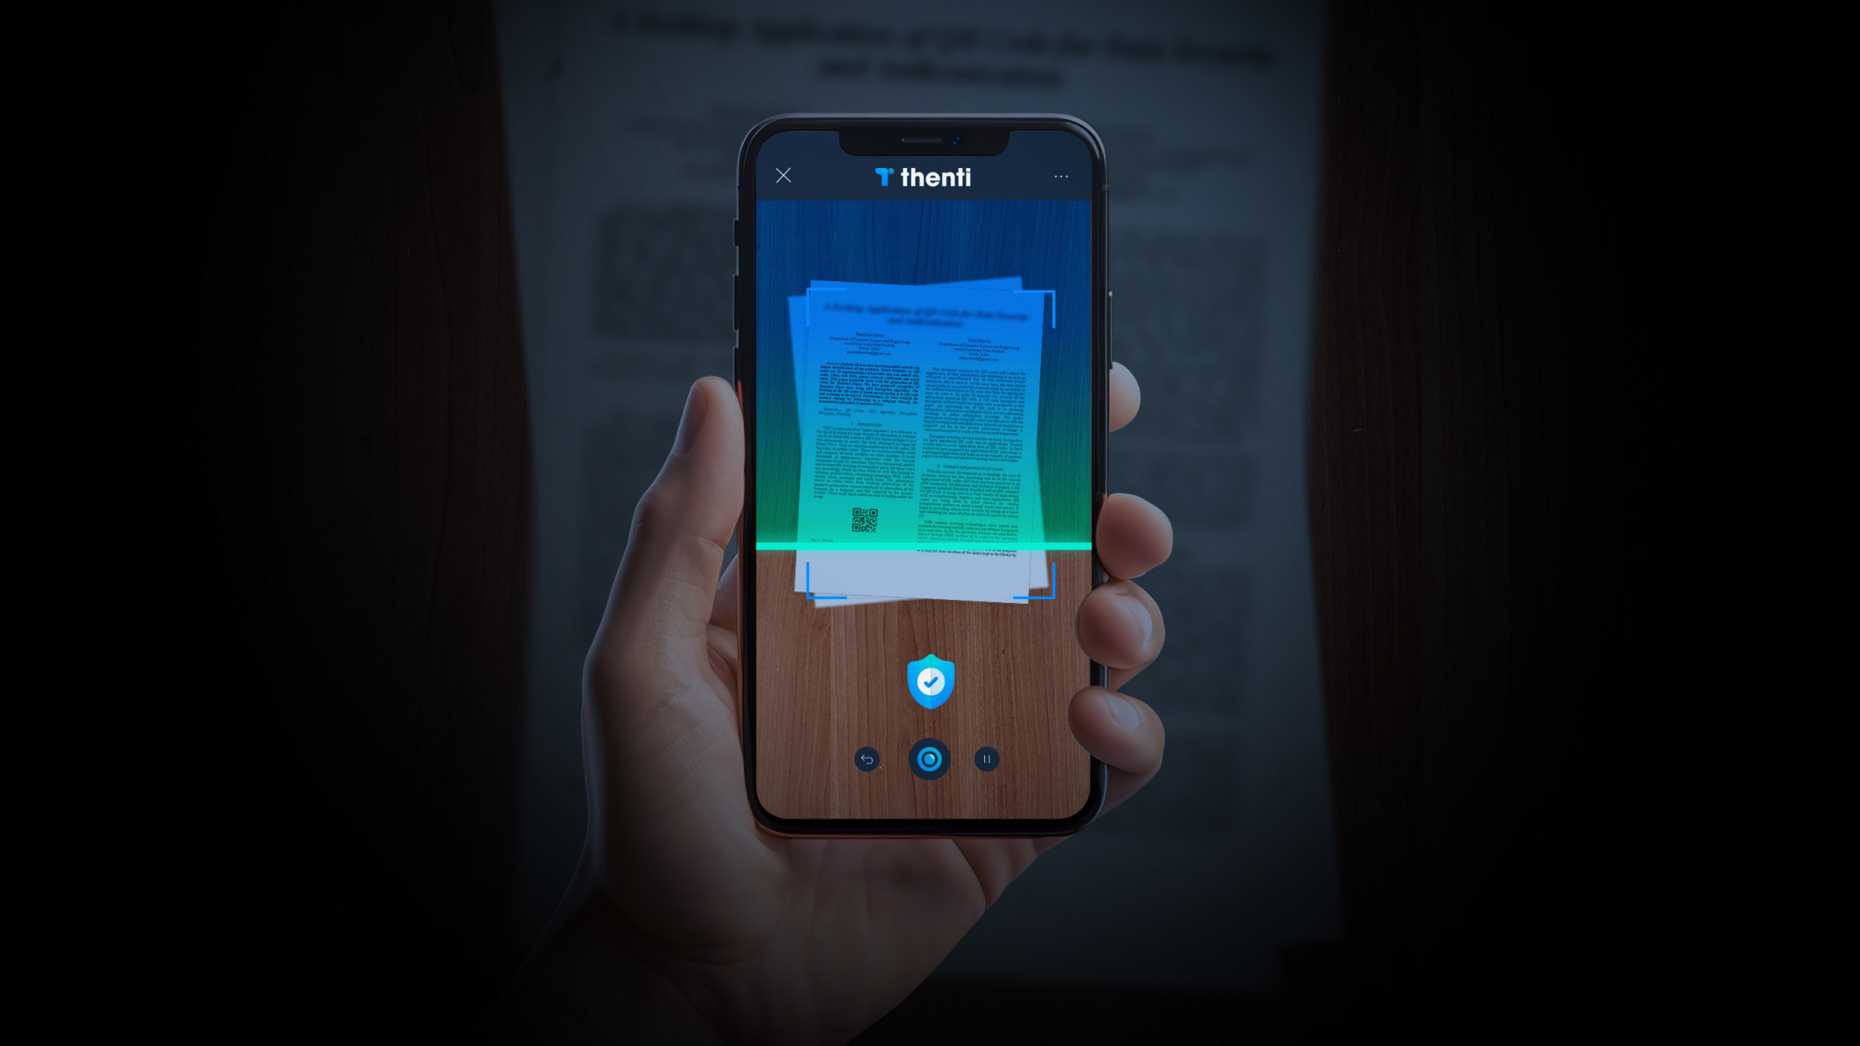 A document is scanned with the smartphone using the thenti app.